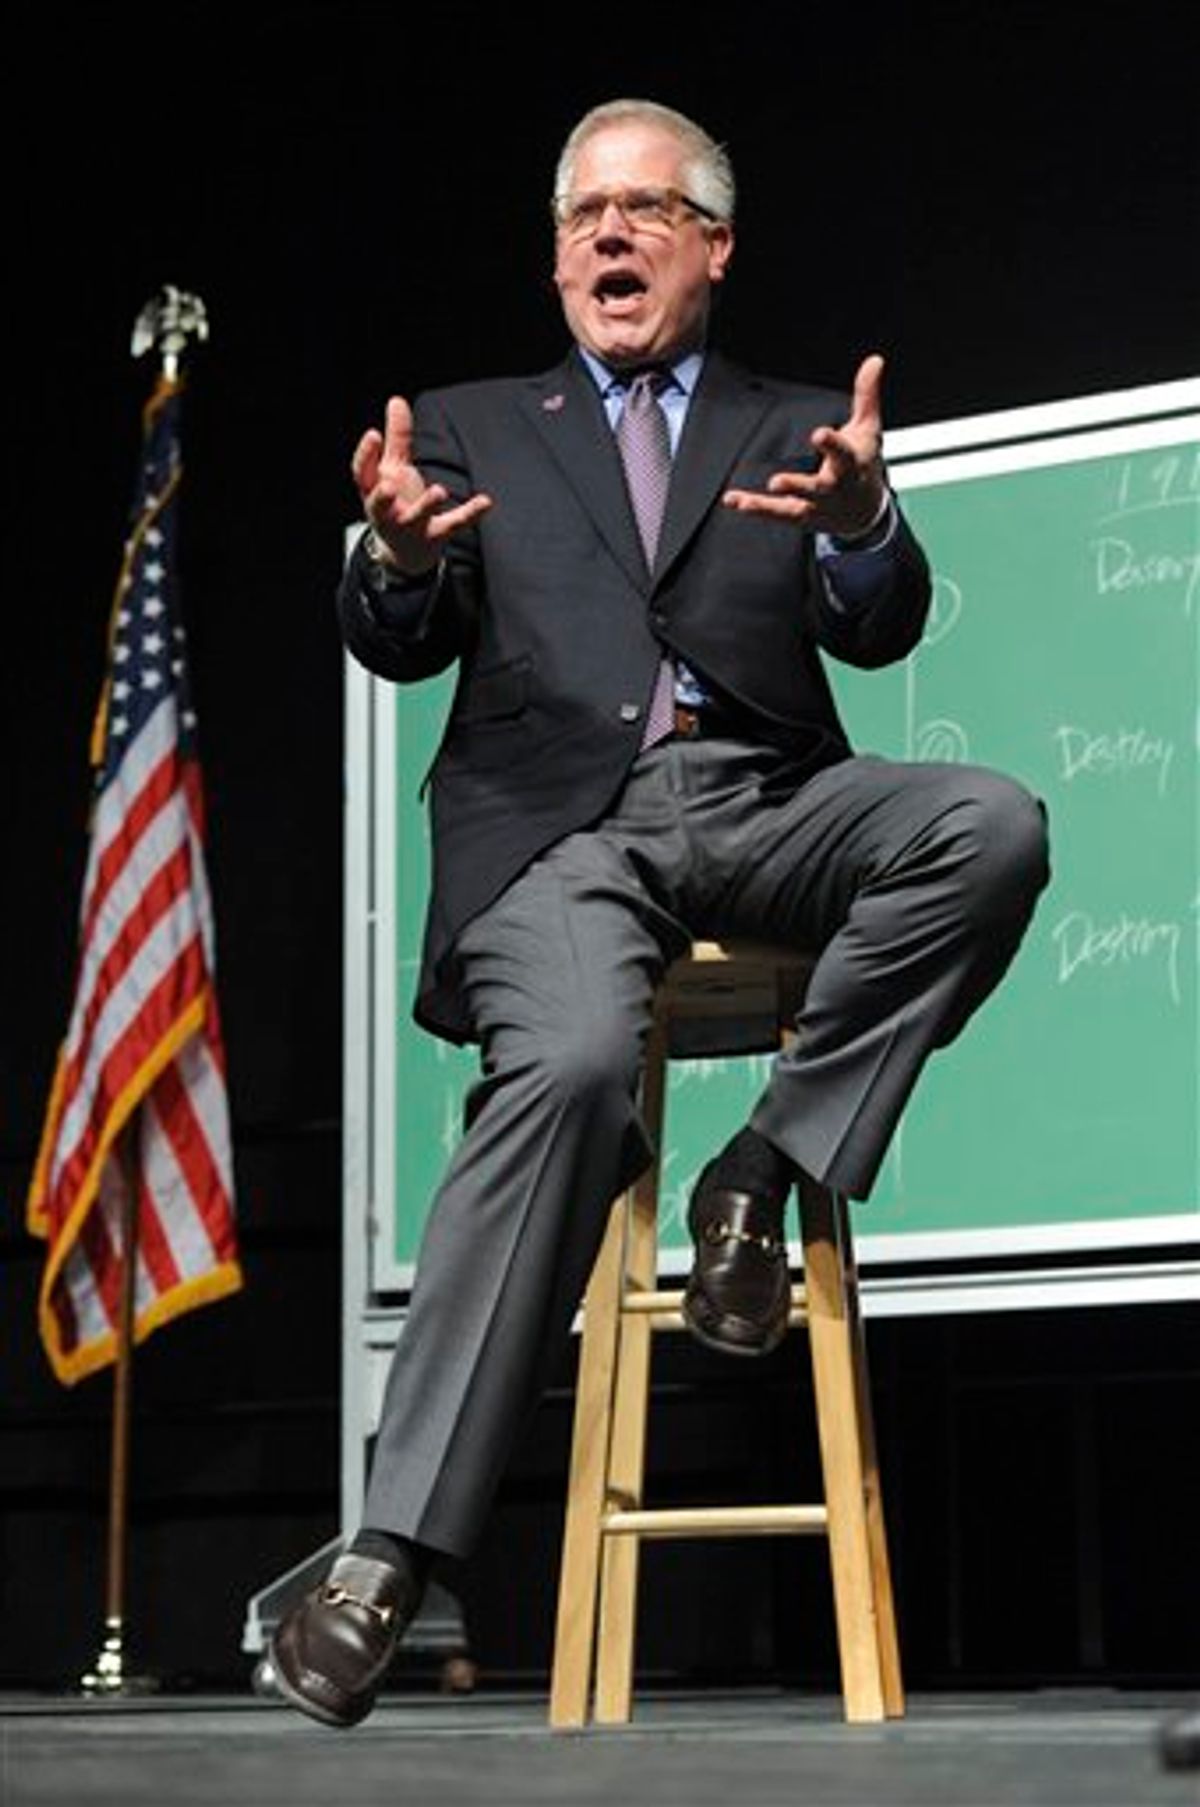 Political commentator Glenn Beck appears on stage in Anchorage, Alaska on Saturday, Sept. 11, 2010.  The event featuring the former Alaska Gov. Sarah Palin and the conservative commentator Saturday night brought out two very different crowds. (AP Photo/Michael Dinneen) (AP)